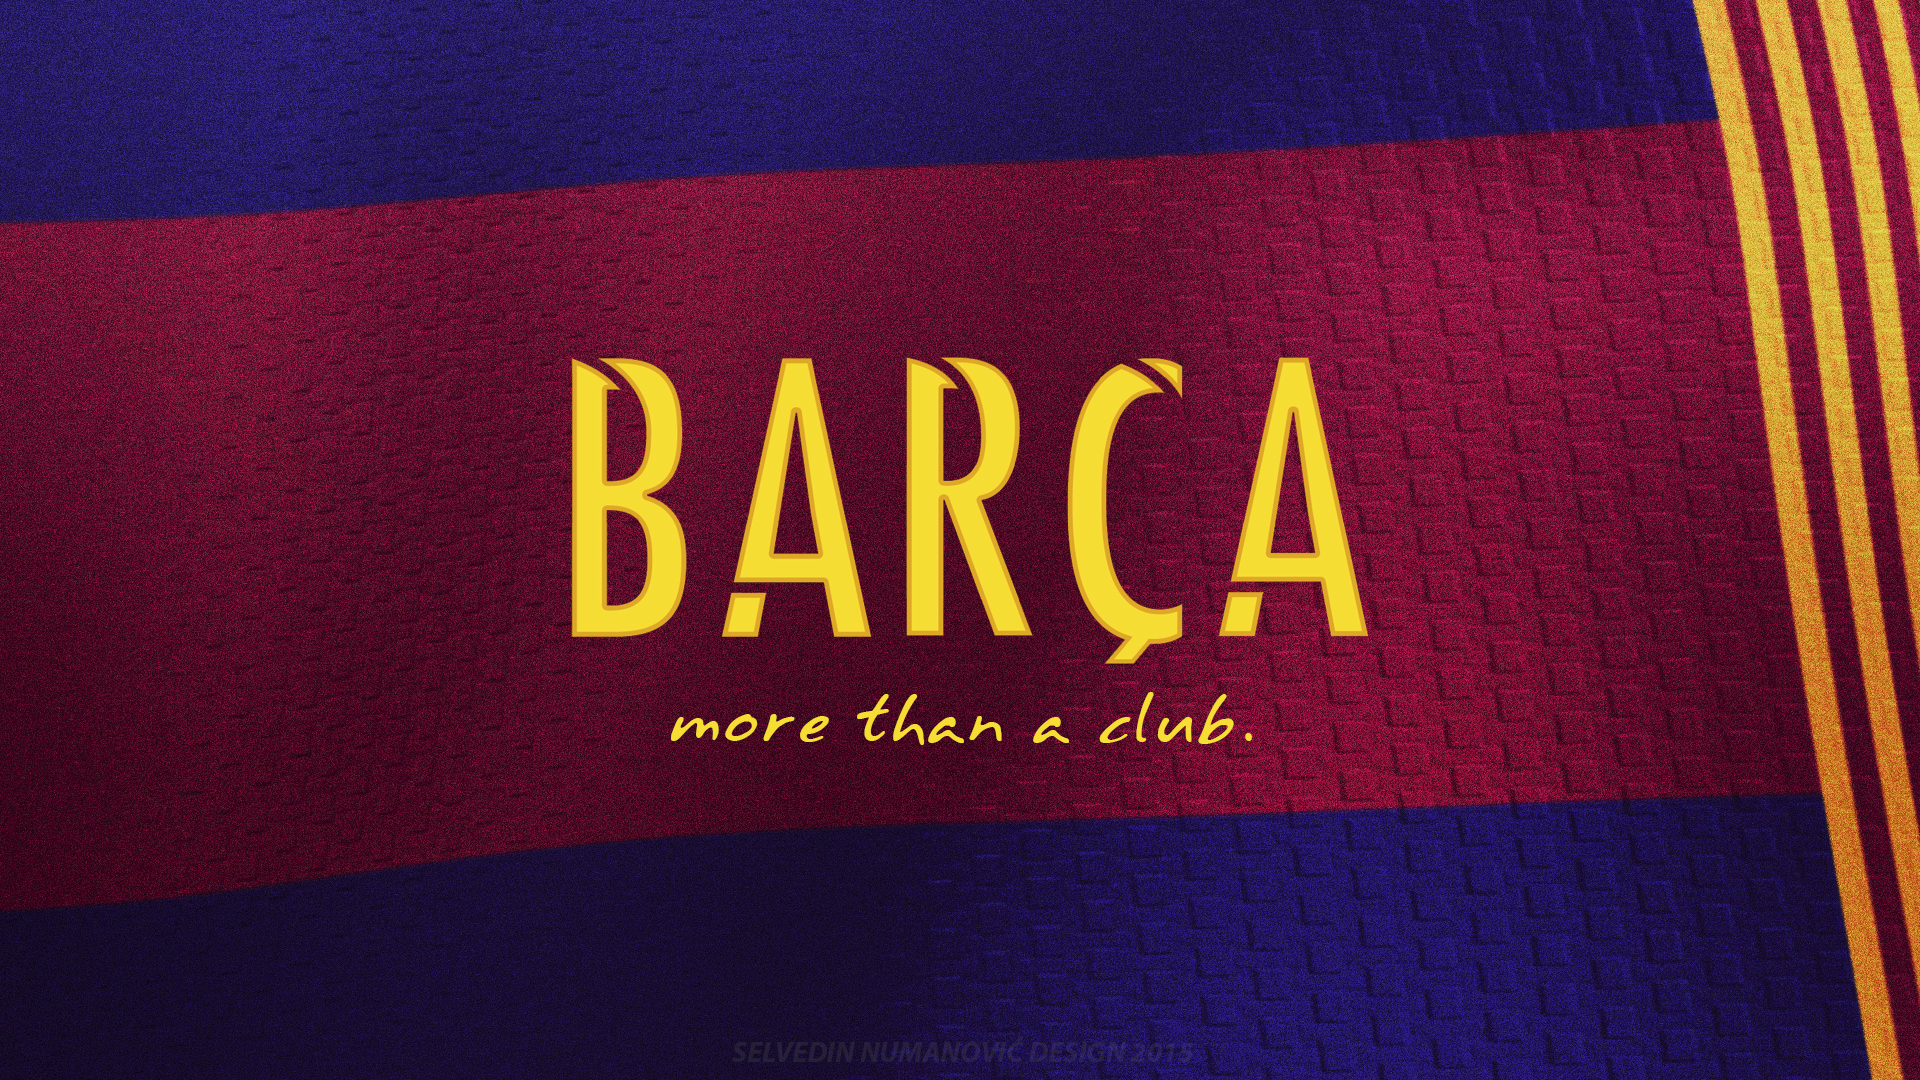 Barcalona Fc Wallpapers